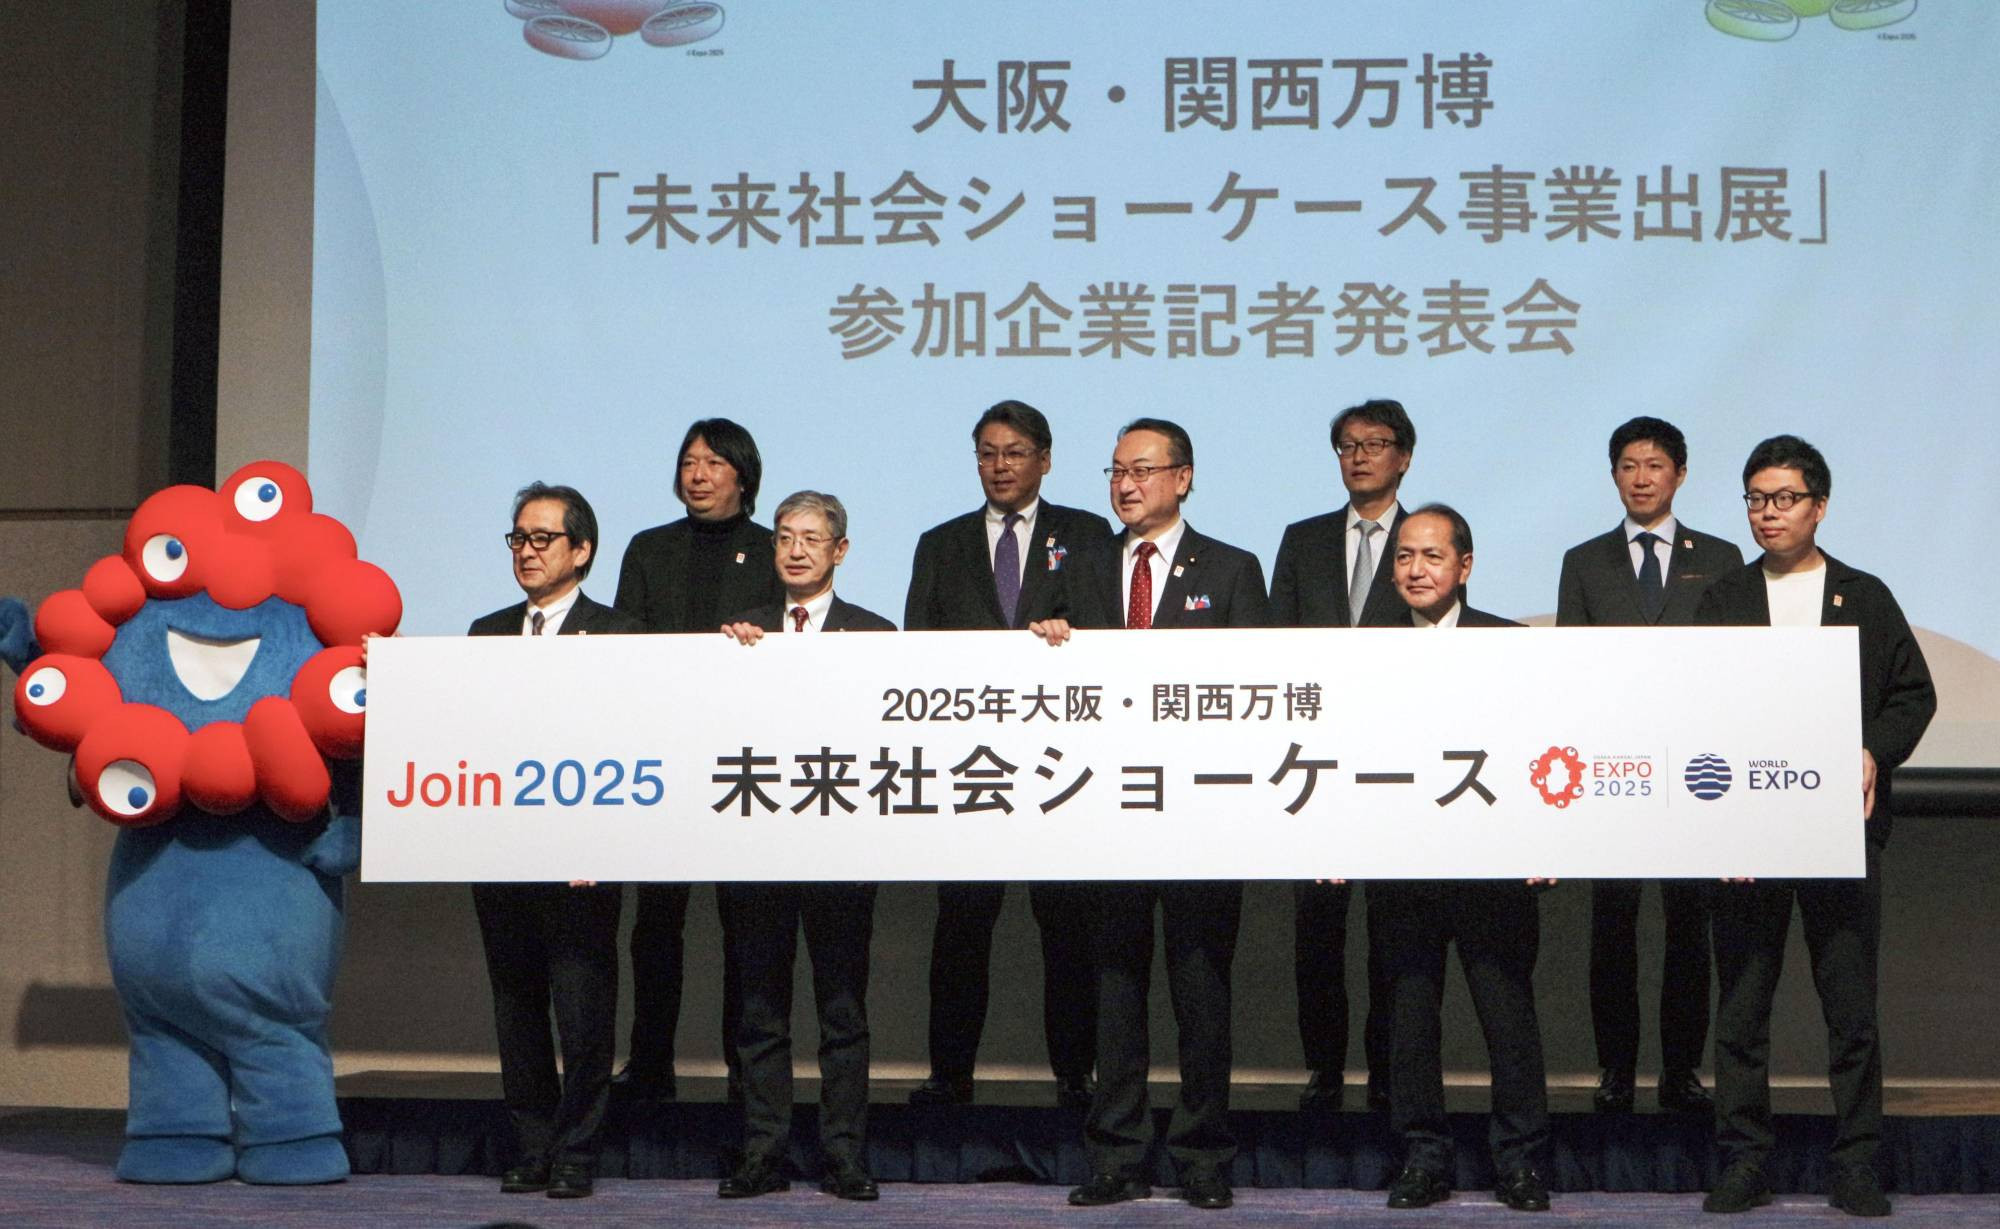 Japanese advertising agency have been banned by the 2025 World Exposition in Osaka from bidding for contracts for the event ©Expo 2025